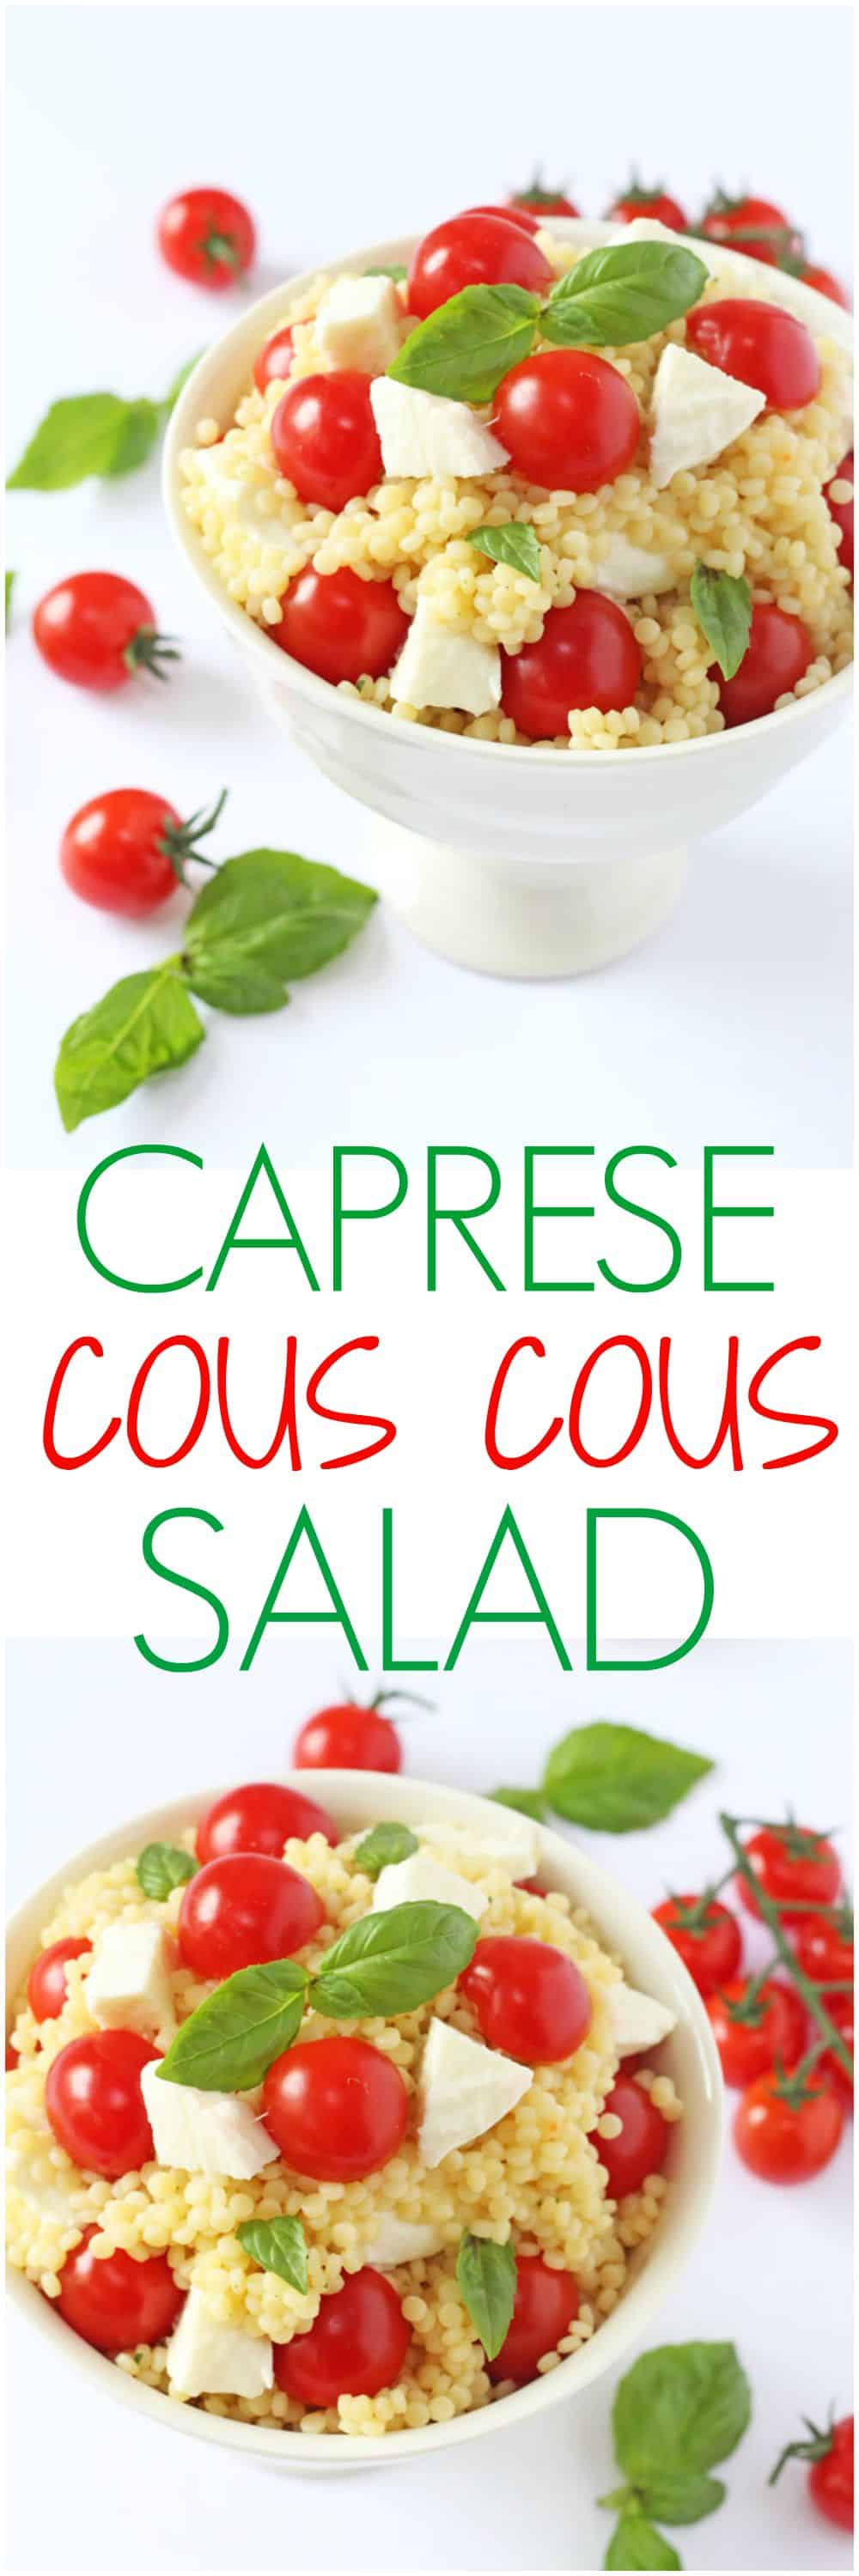 Caprese Cous Cous Salad - My Fussy Eater | Easy Family Recipes